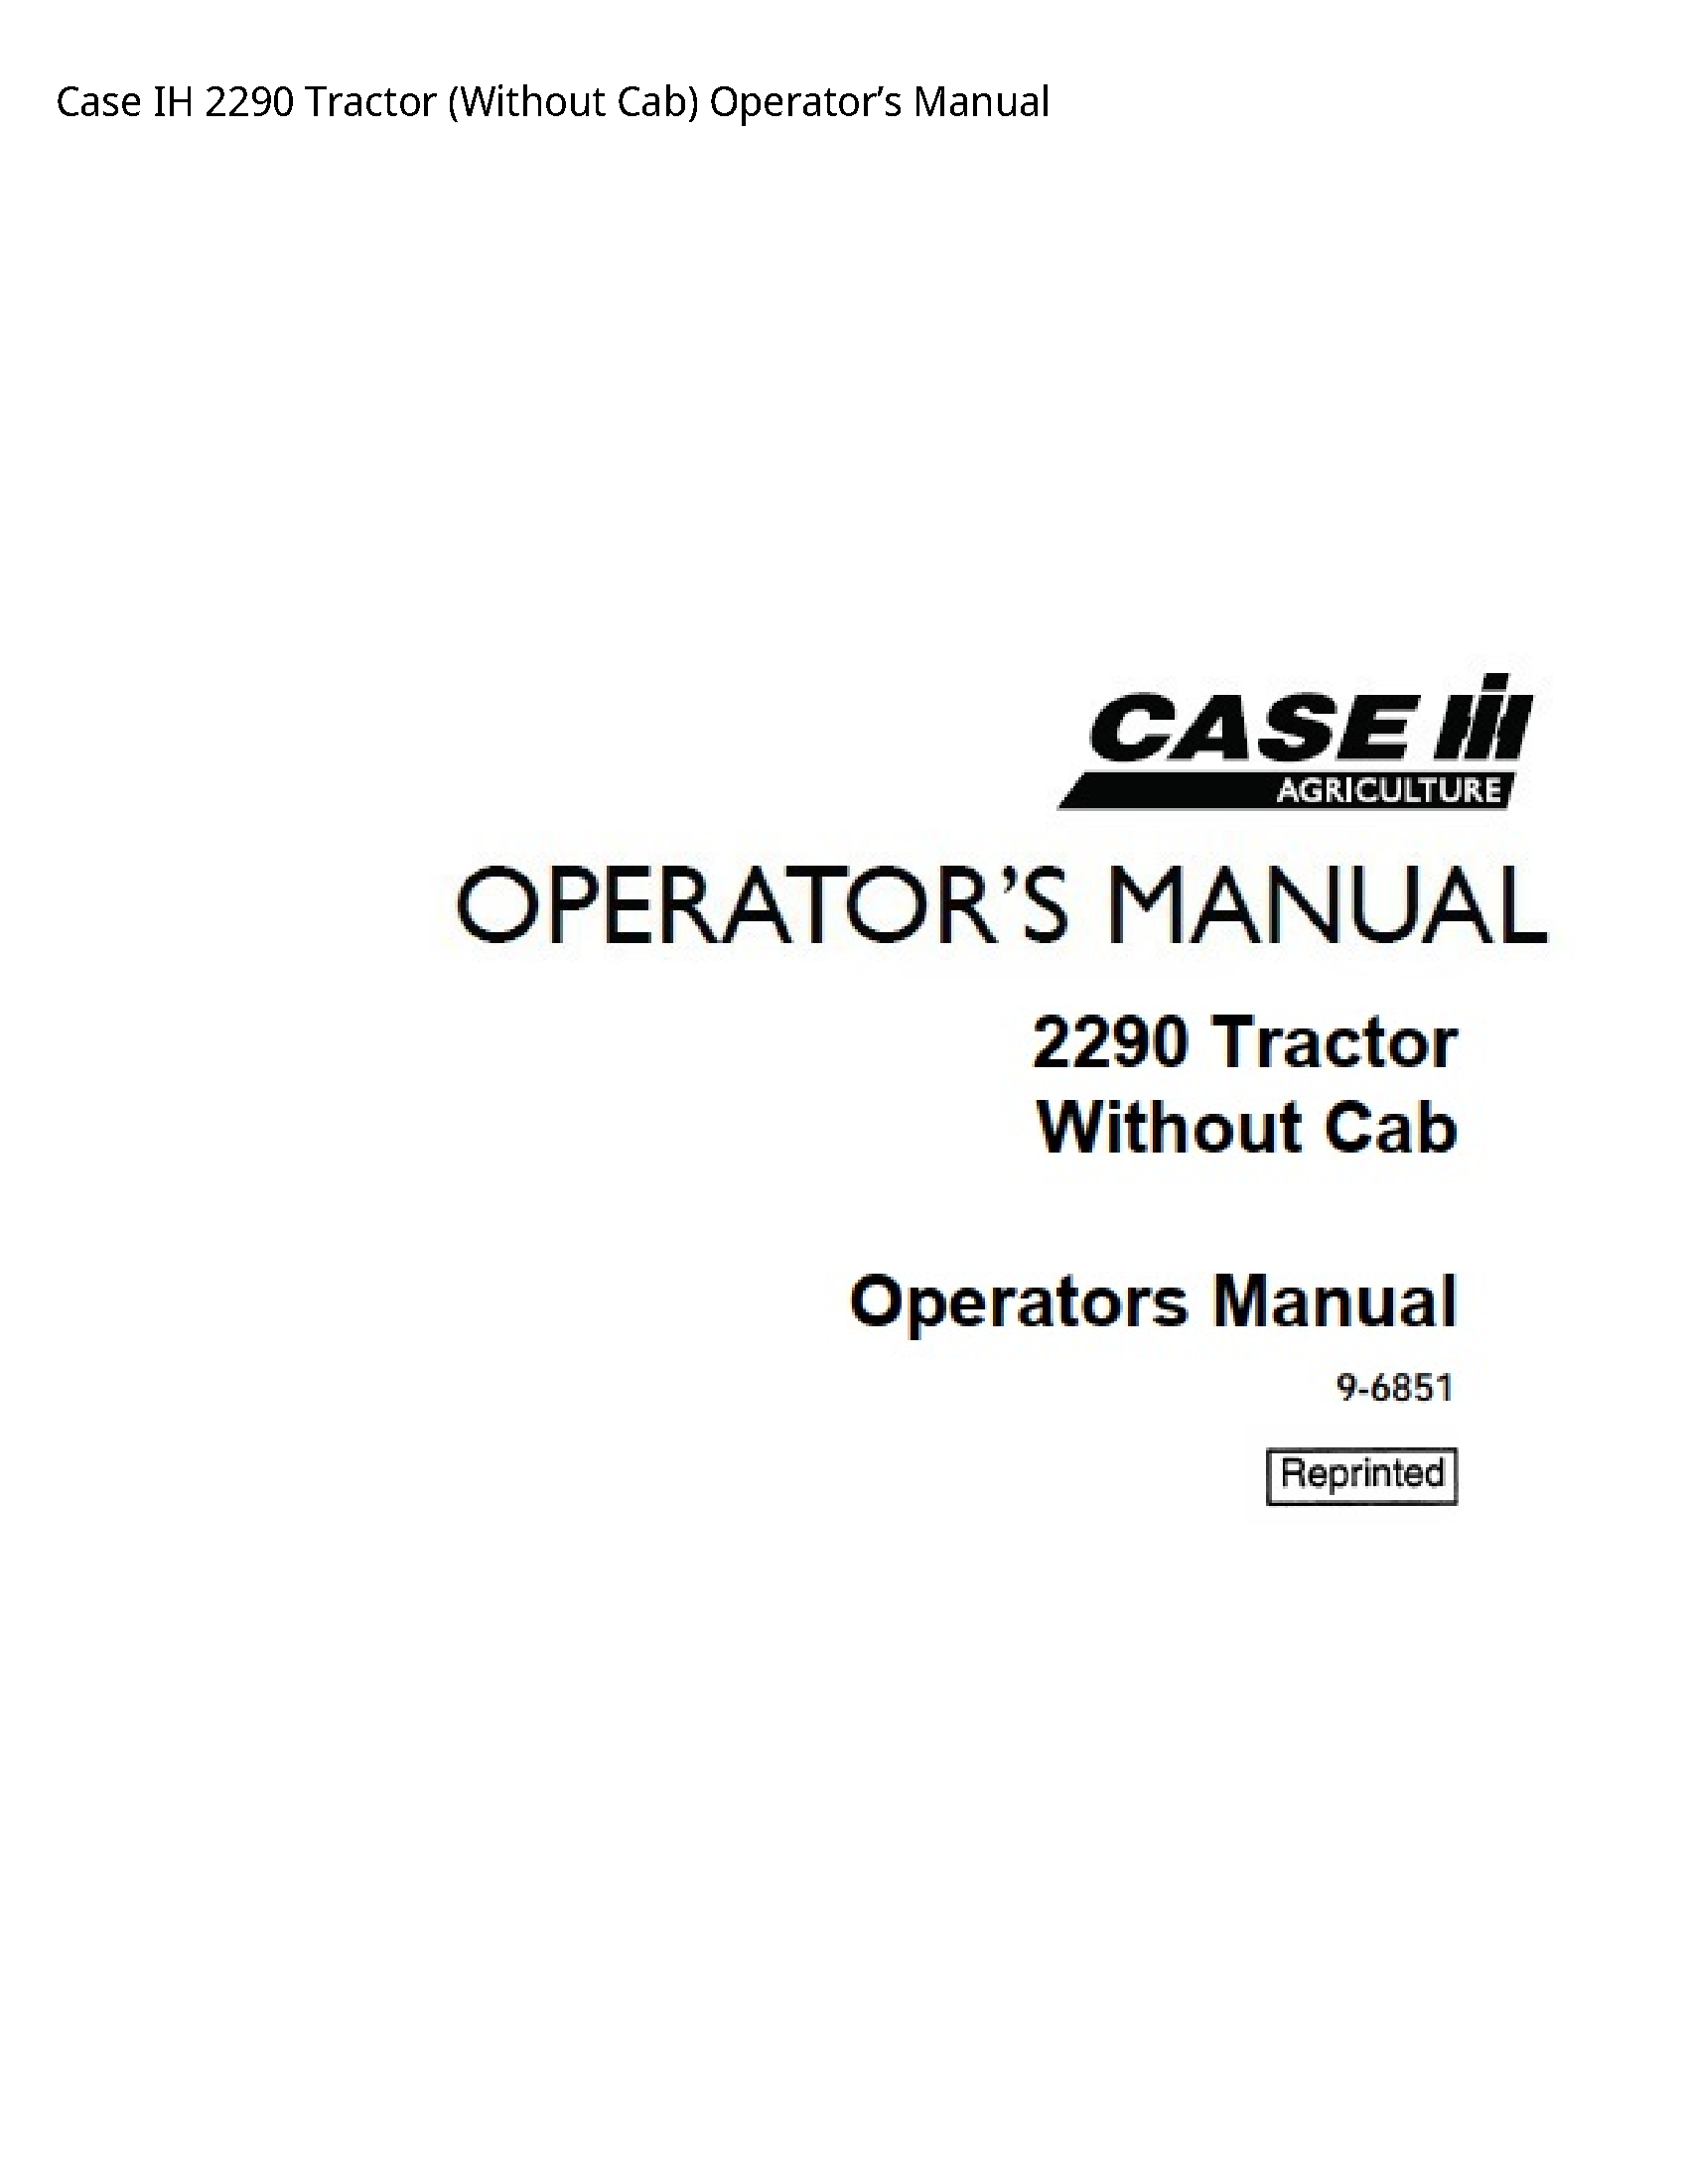 Case/Case IH 2290 IH Tractor (Without Cab) Operator’s manual